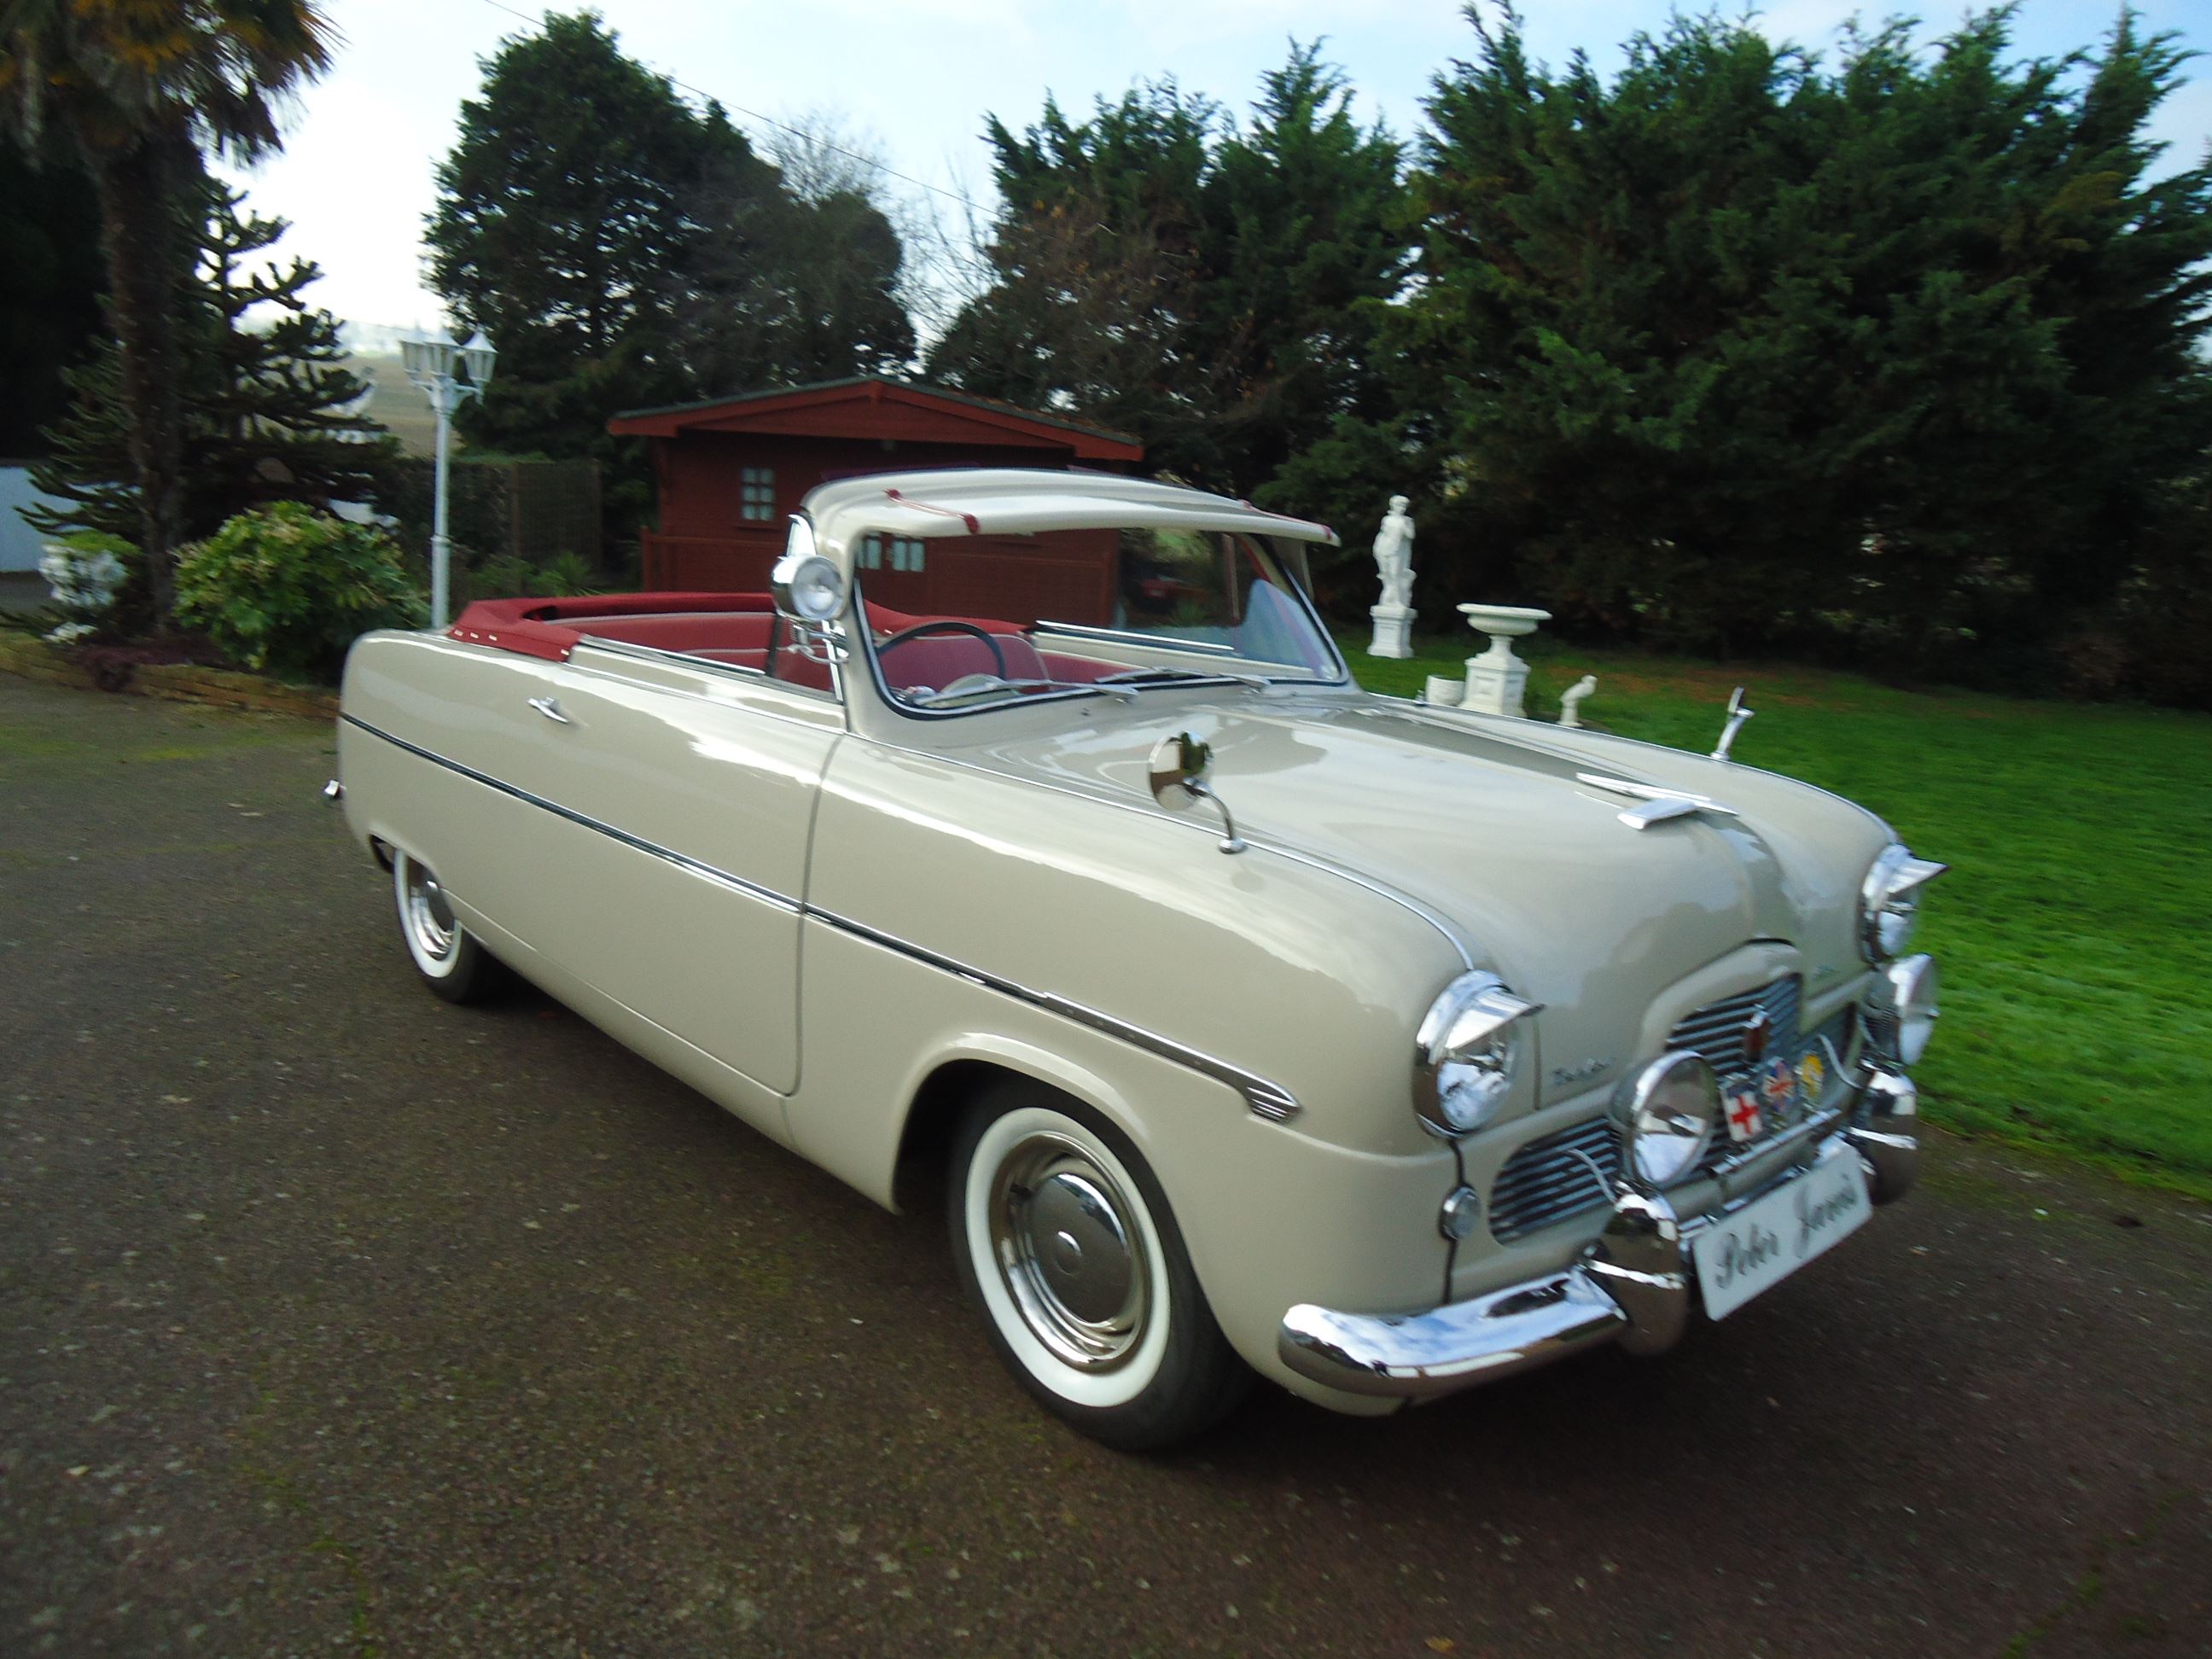 Baby Zephyr” A Perfect Blend of Vintage Ford Cars